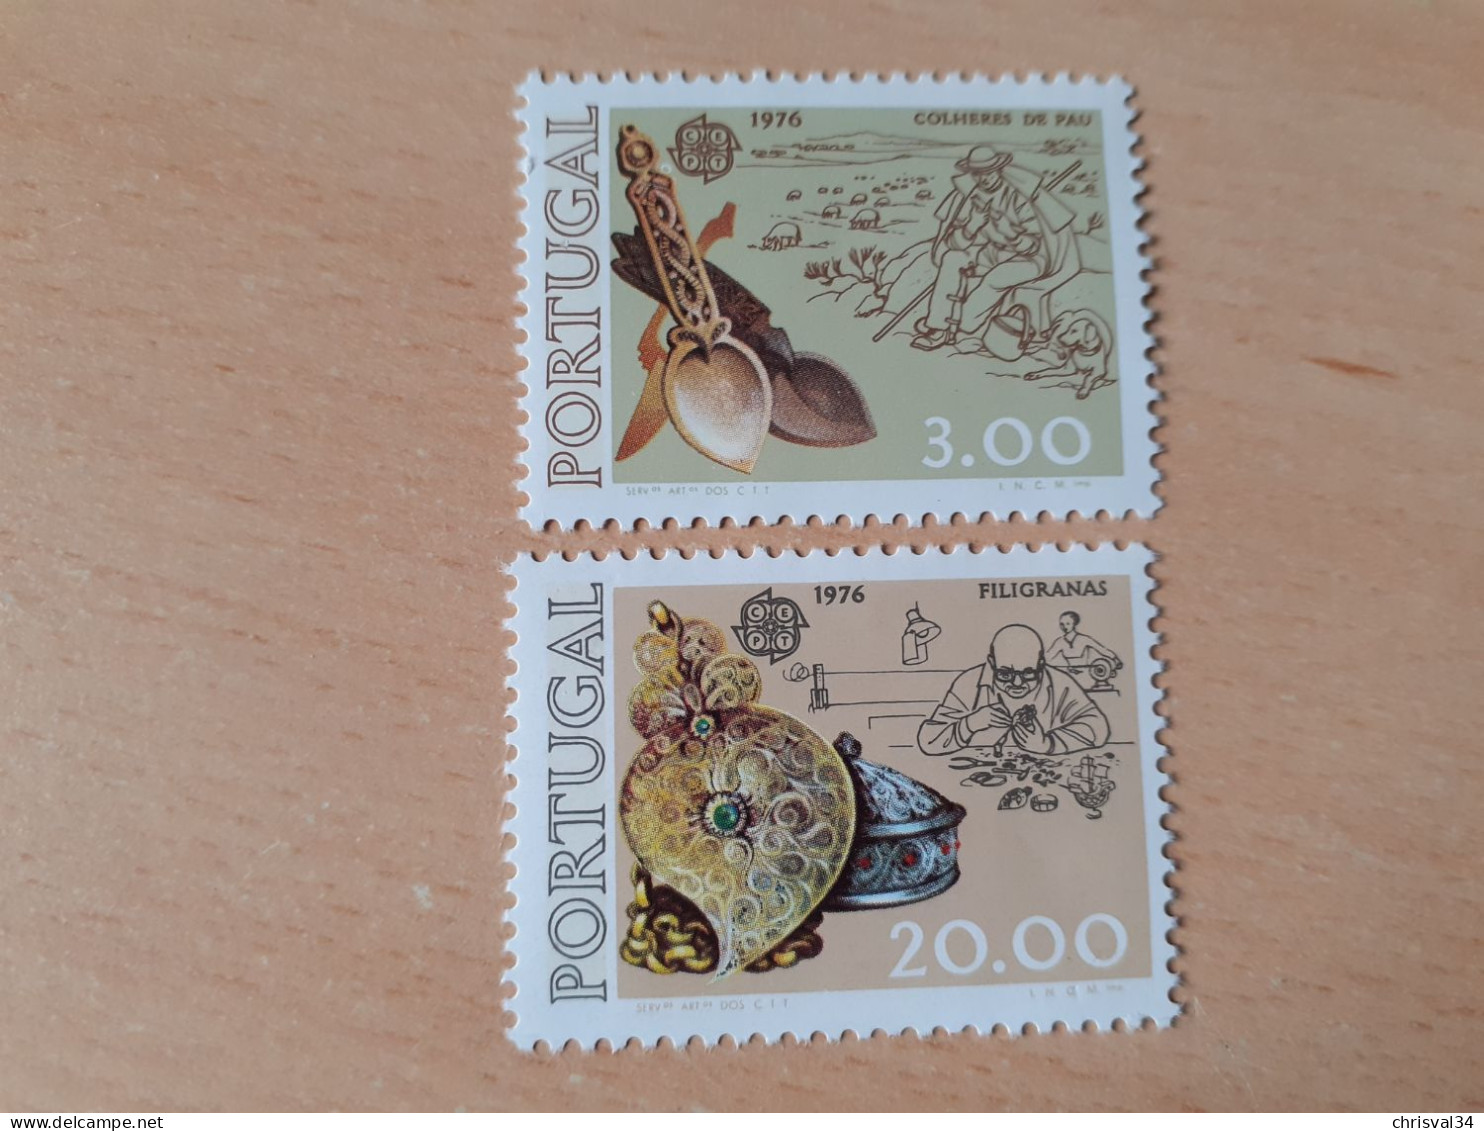 TIMBRES   PORTUGAL     EUROPA    1976    N  1291  /  1292   COTE  35,00  EUROS   NEUFS   LUXE** - 1976